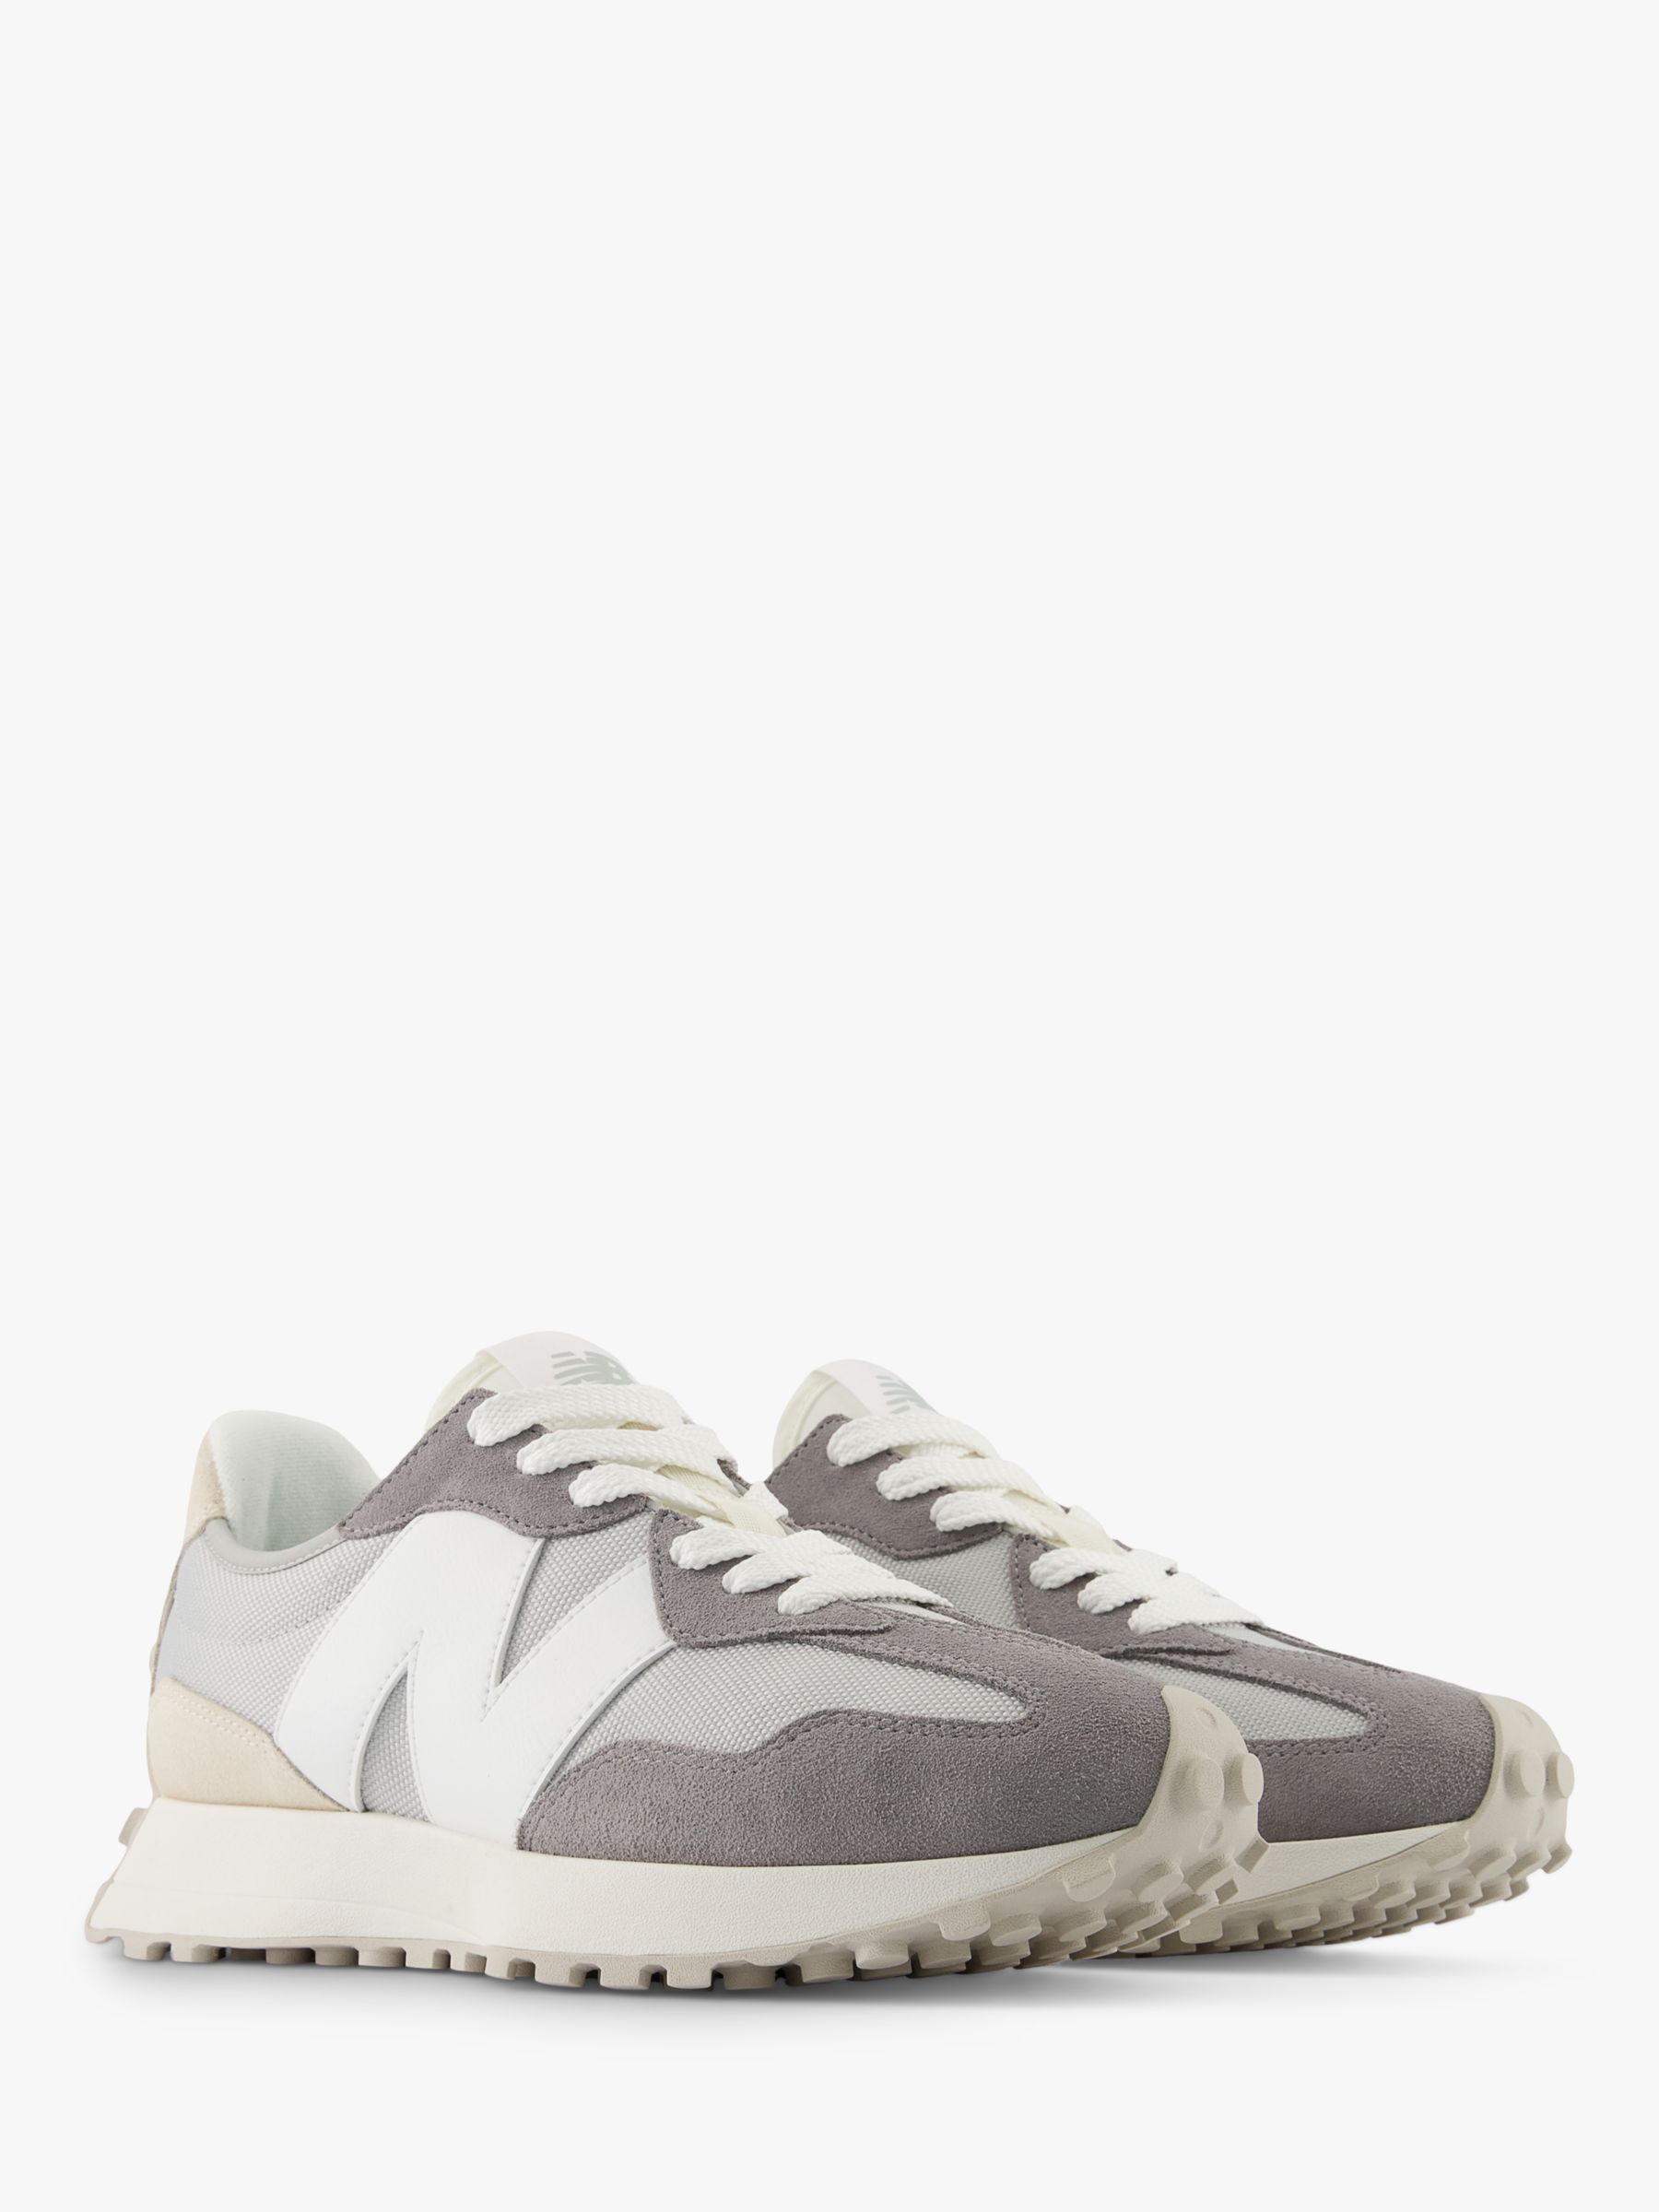 New Balance 327 Classic Suede Mesh Trainers, Grey, 10